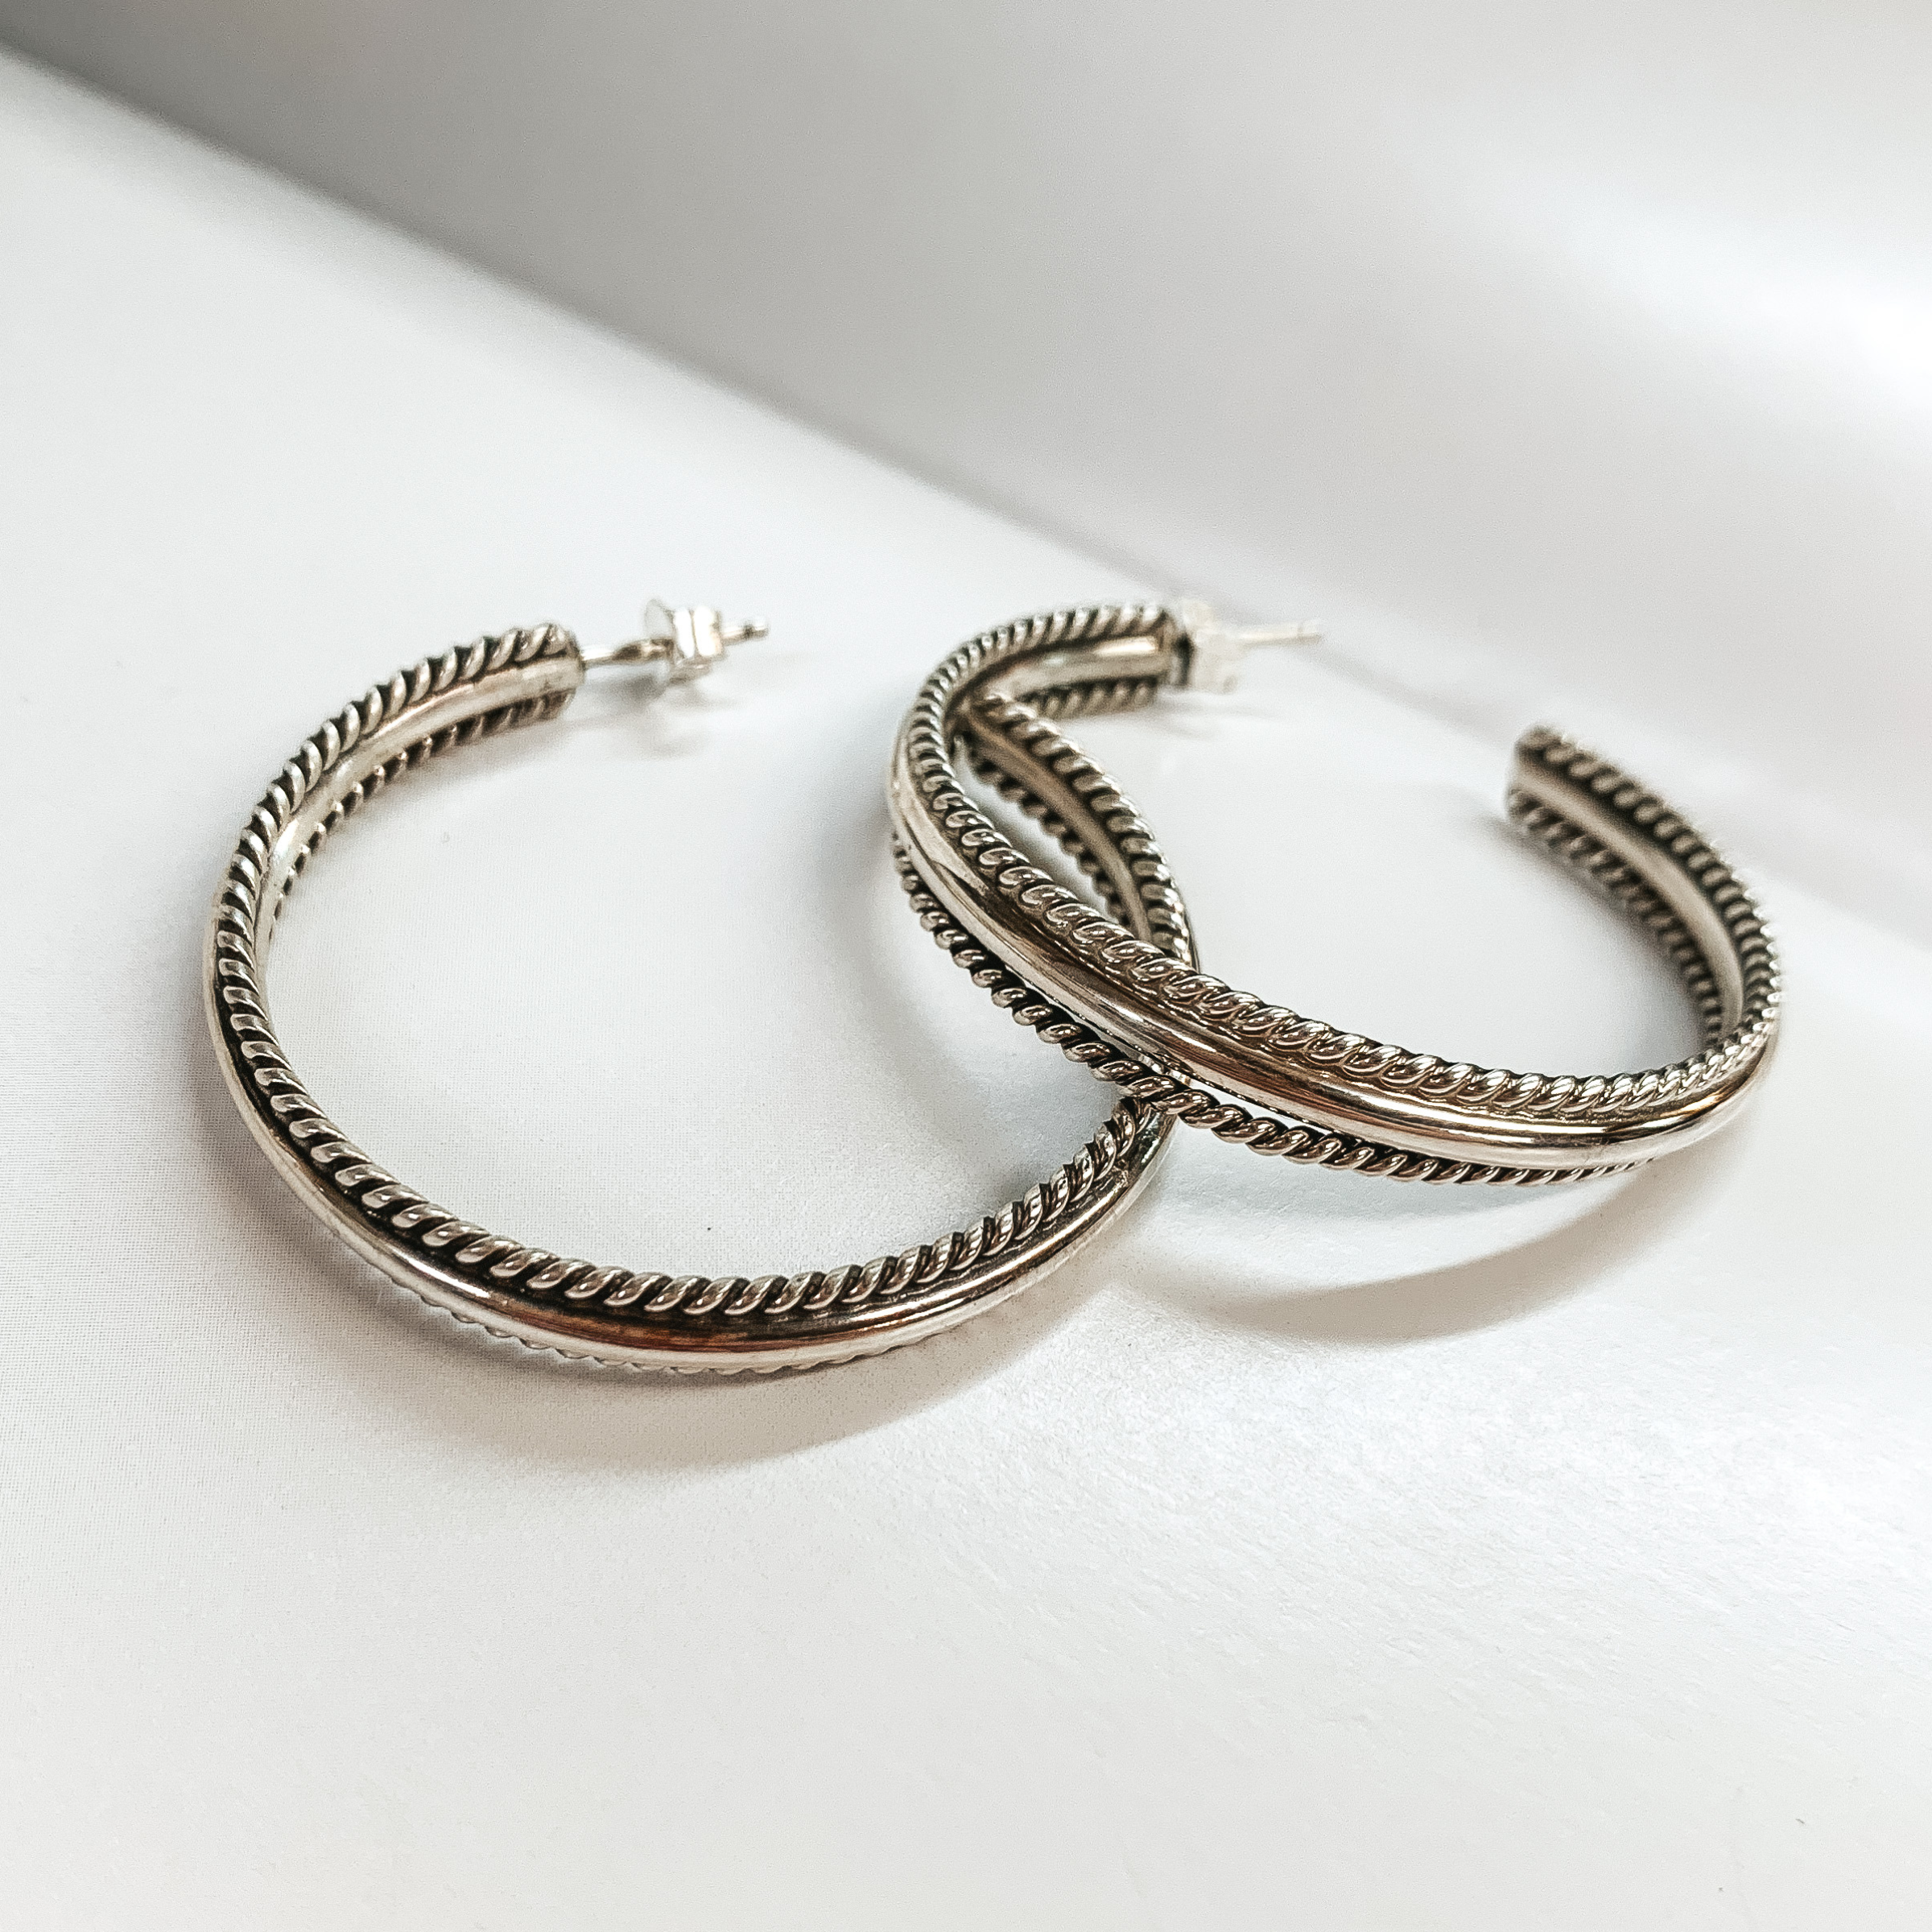 Navajo | Navajo Handmade Sterling Silver Hoop Earrings with a Rope Detailing Outline - Giddy Up Glamour Boutique